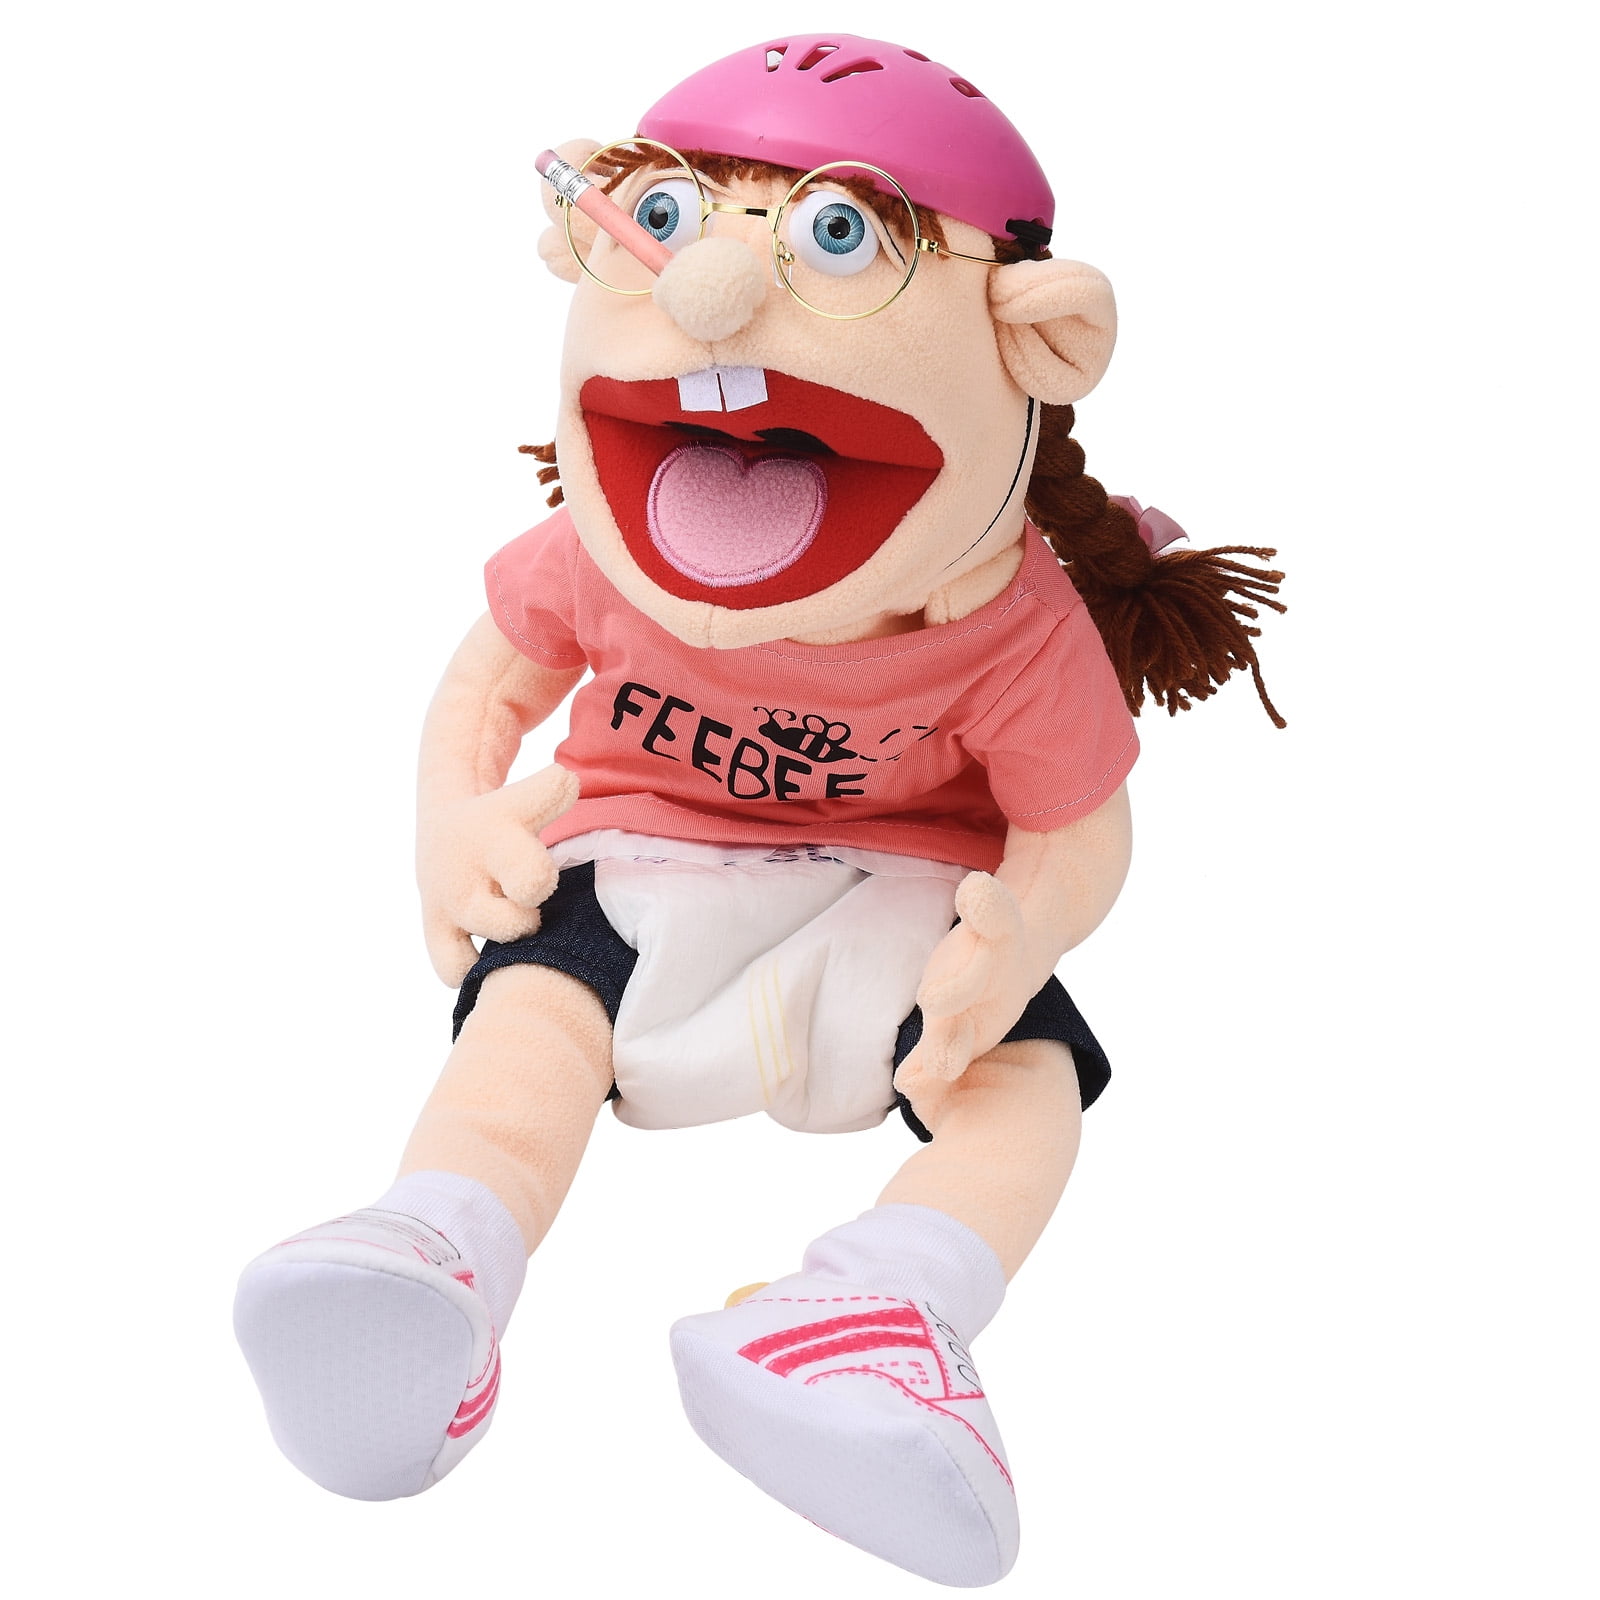 MakeCool - (Jeffy) Jeffy Puppet Soft Plush Toy and His Sister Feebee Puppet  Plush Toy Doll, Mischievous Funny Puppets Toy Hand Puppet with Working Mouth  for Play House Birthday Christmas Halloween Party